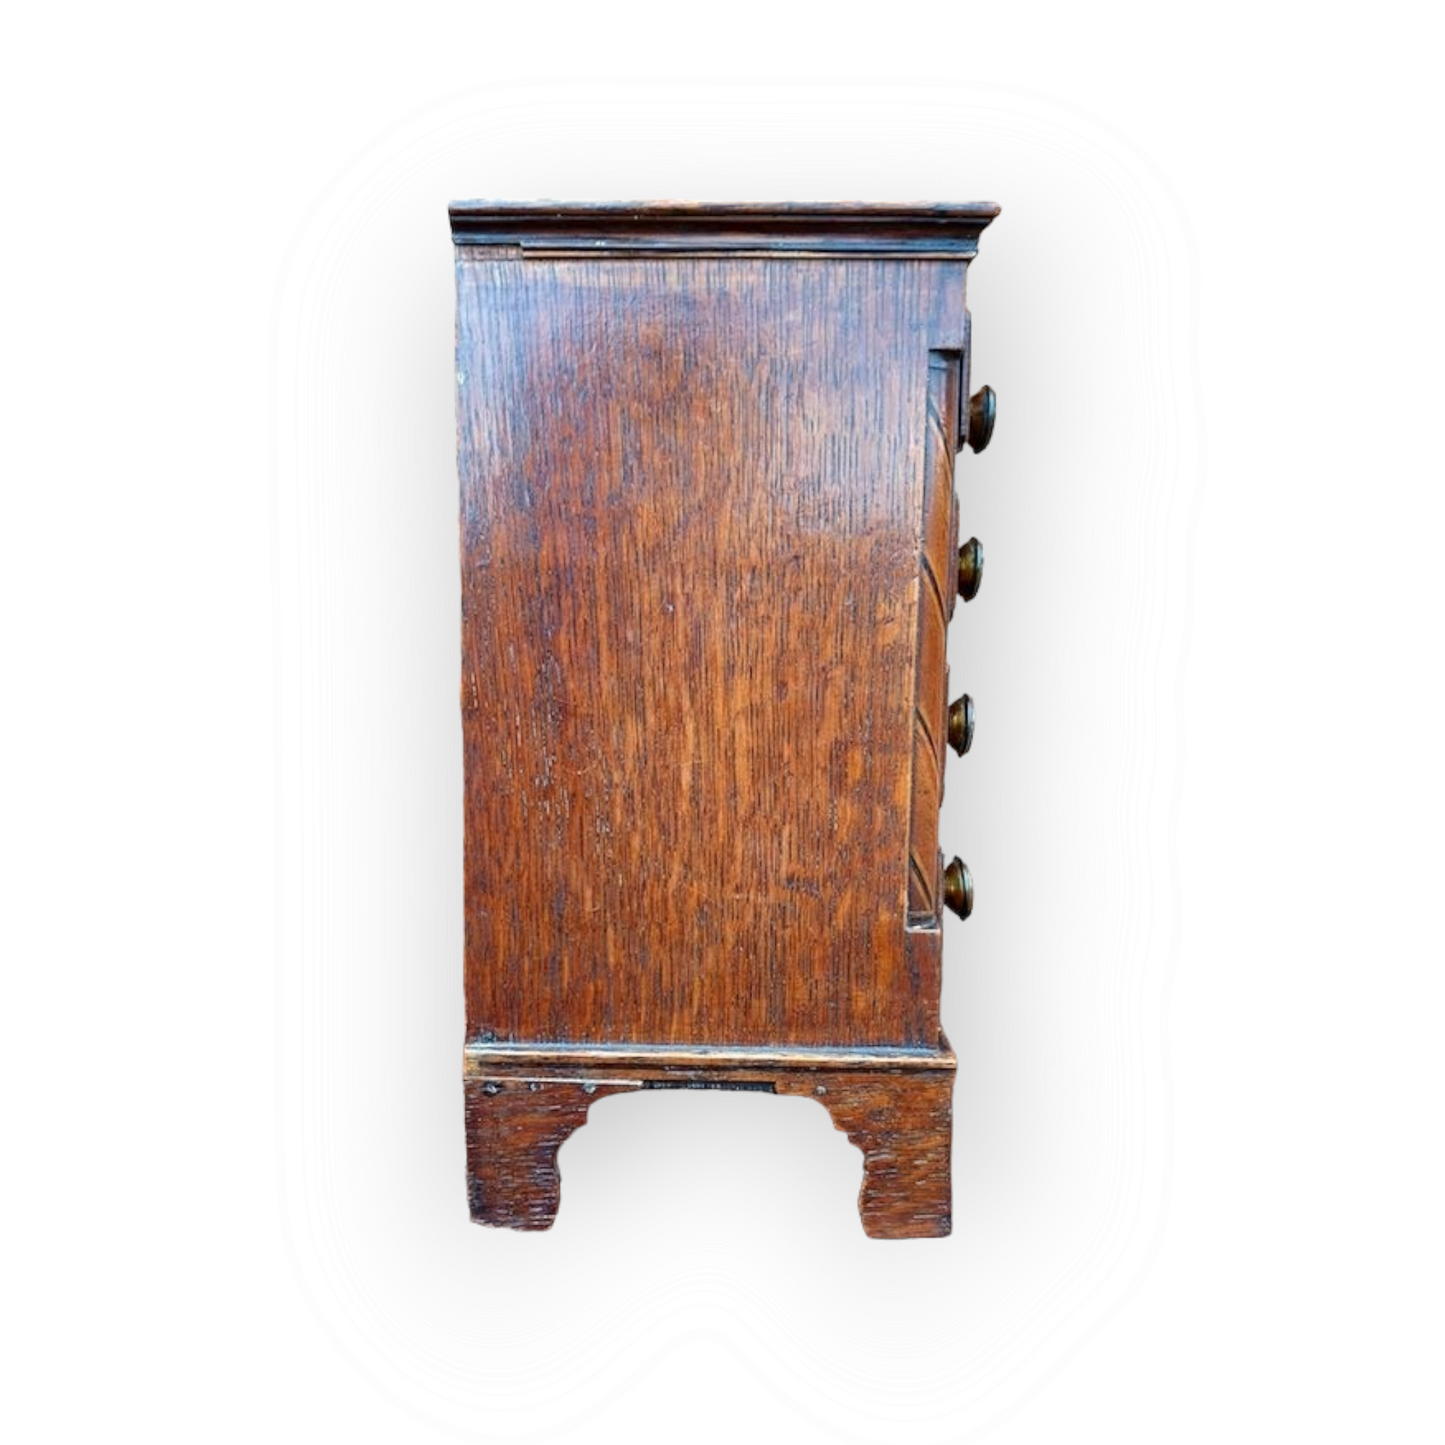 In Miniature - A Late 18th Century Welsh Antique Oak Apprentice Piece Miniature Chest of Drawers, circa 1780